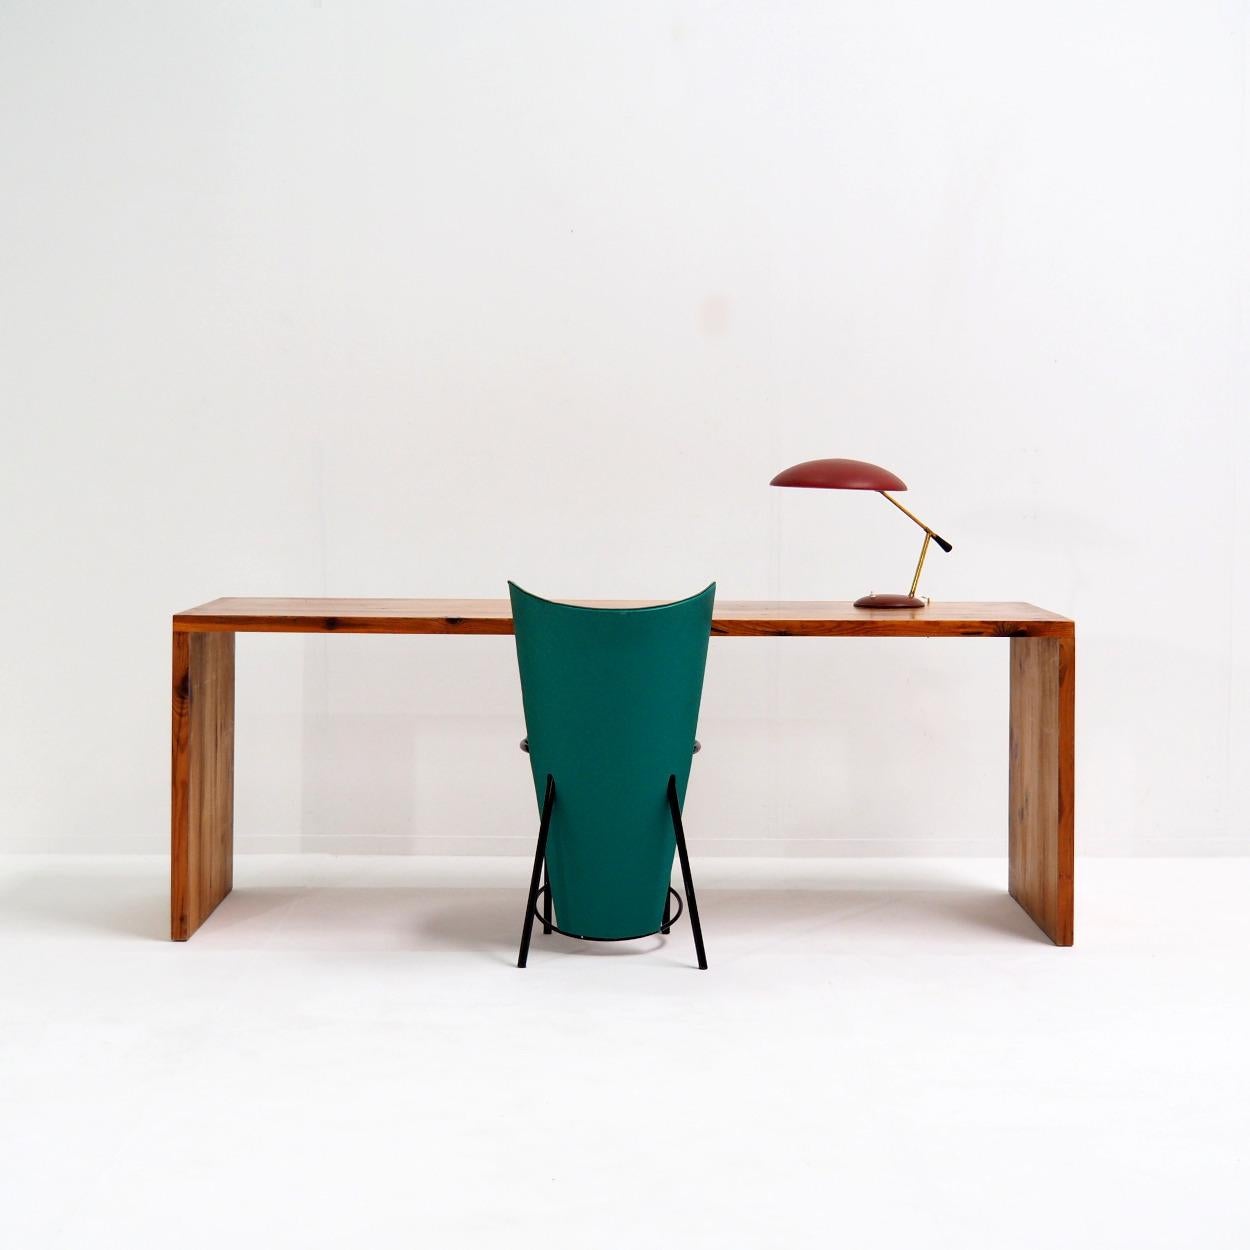 Beautiful desk with drawer unit designed by Dutch designer Ate van Apeldoorn for Houtwerk Hattem.

Ate van Apeldoorn designed in a minimalist style that reminds us of the designs of Charlotte Perriand, Pierre Chapo, etc. Please note that I have